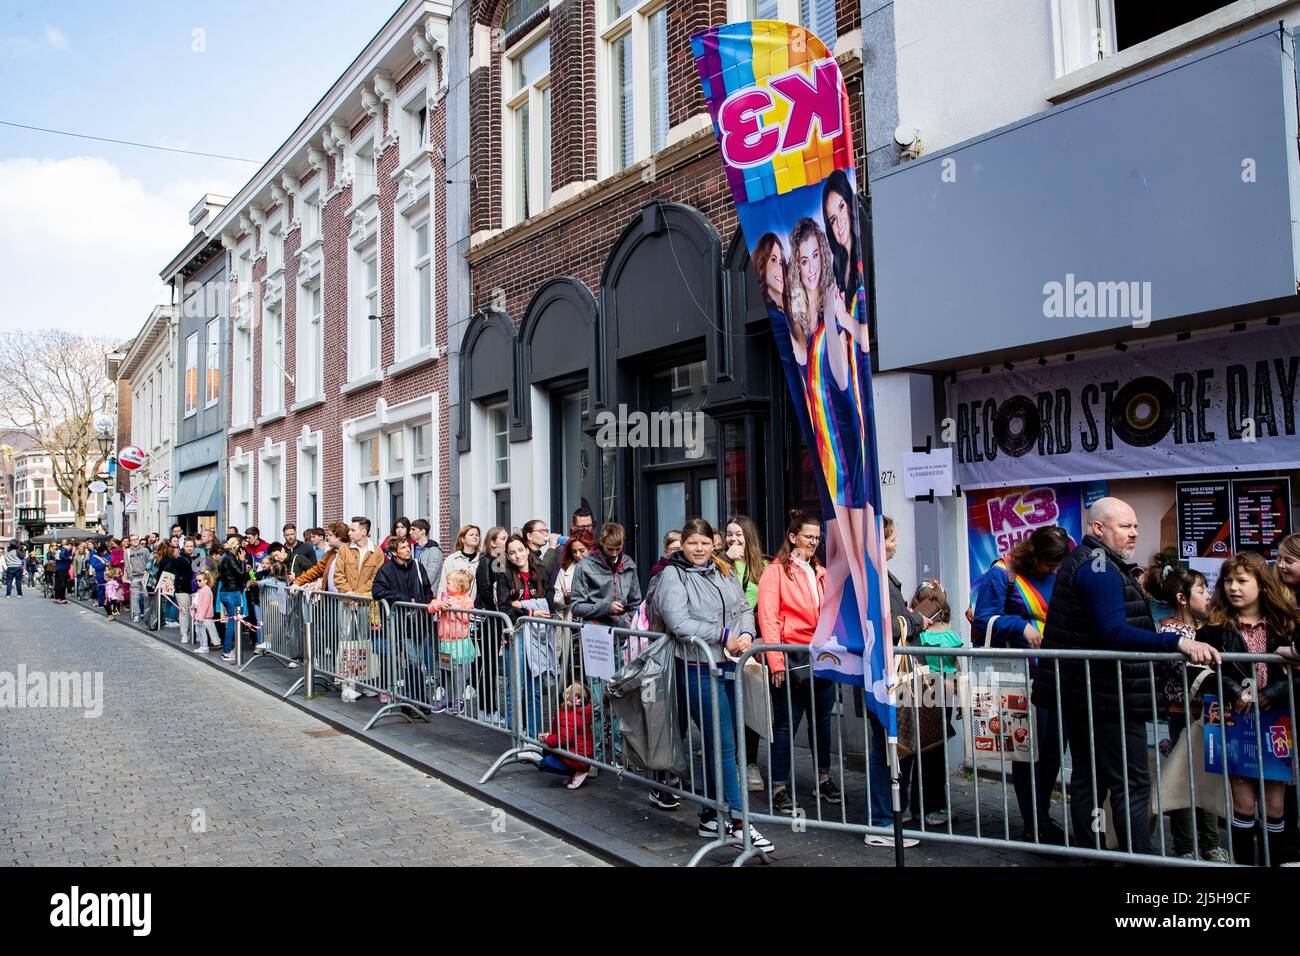 2022-04-23 10:37:13 BERGEN OP ZOOM - The Belgian girl group K3 will sign their new album Waterfall during Record Store Day. Many fans, both very young and older, stood in a line of more than a hundred meters for a long time, but for many it was well worth the wait. ANP KIPPA PAUL BERGEN netherlands out - belgium out Stock Photo